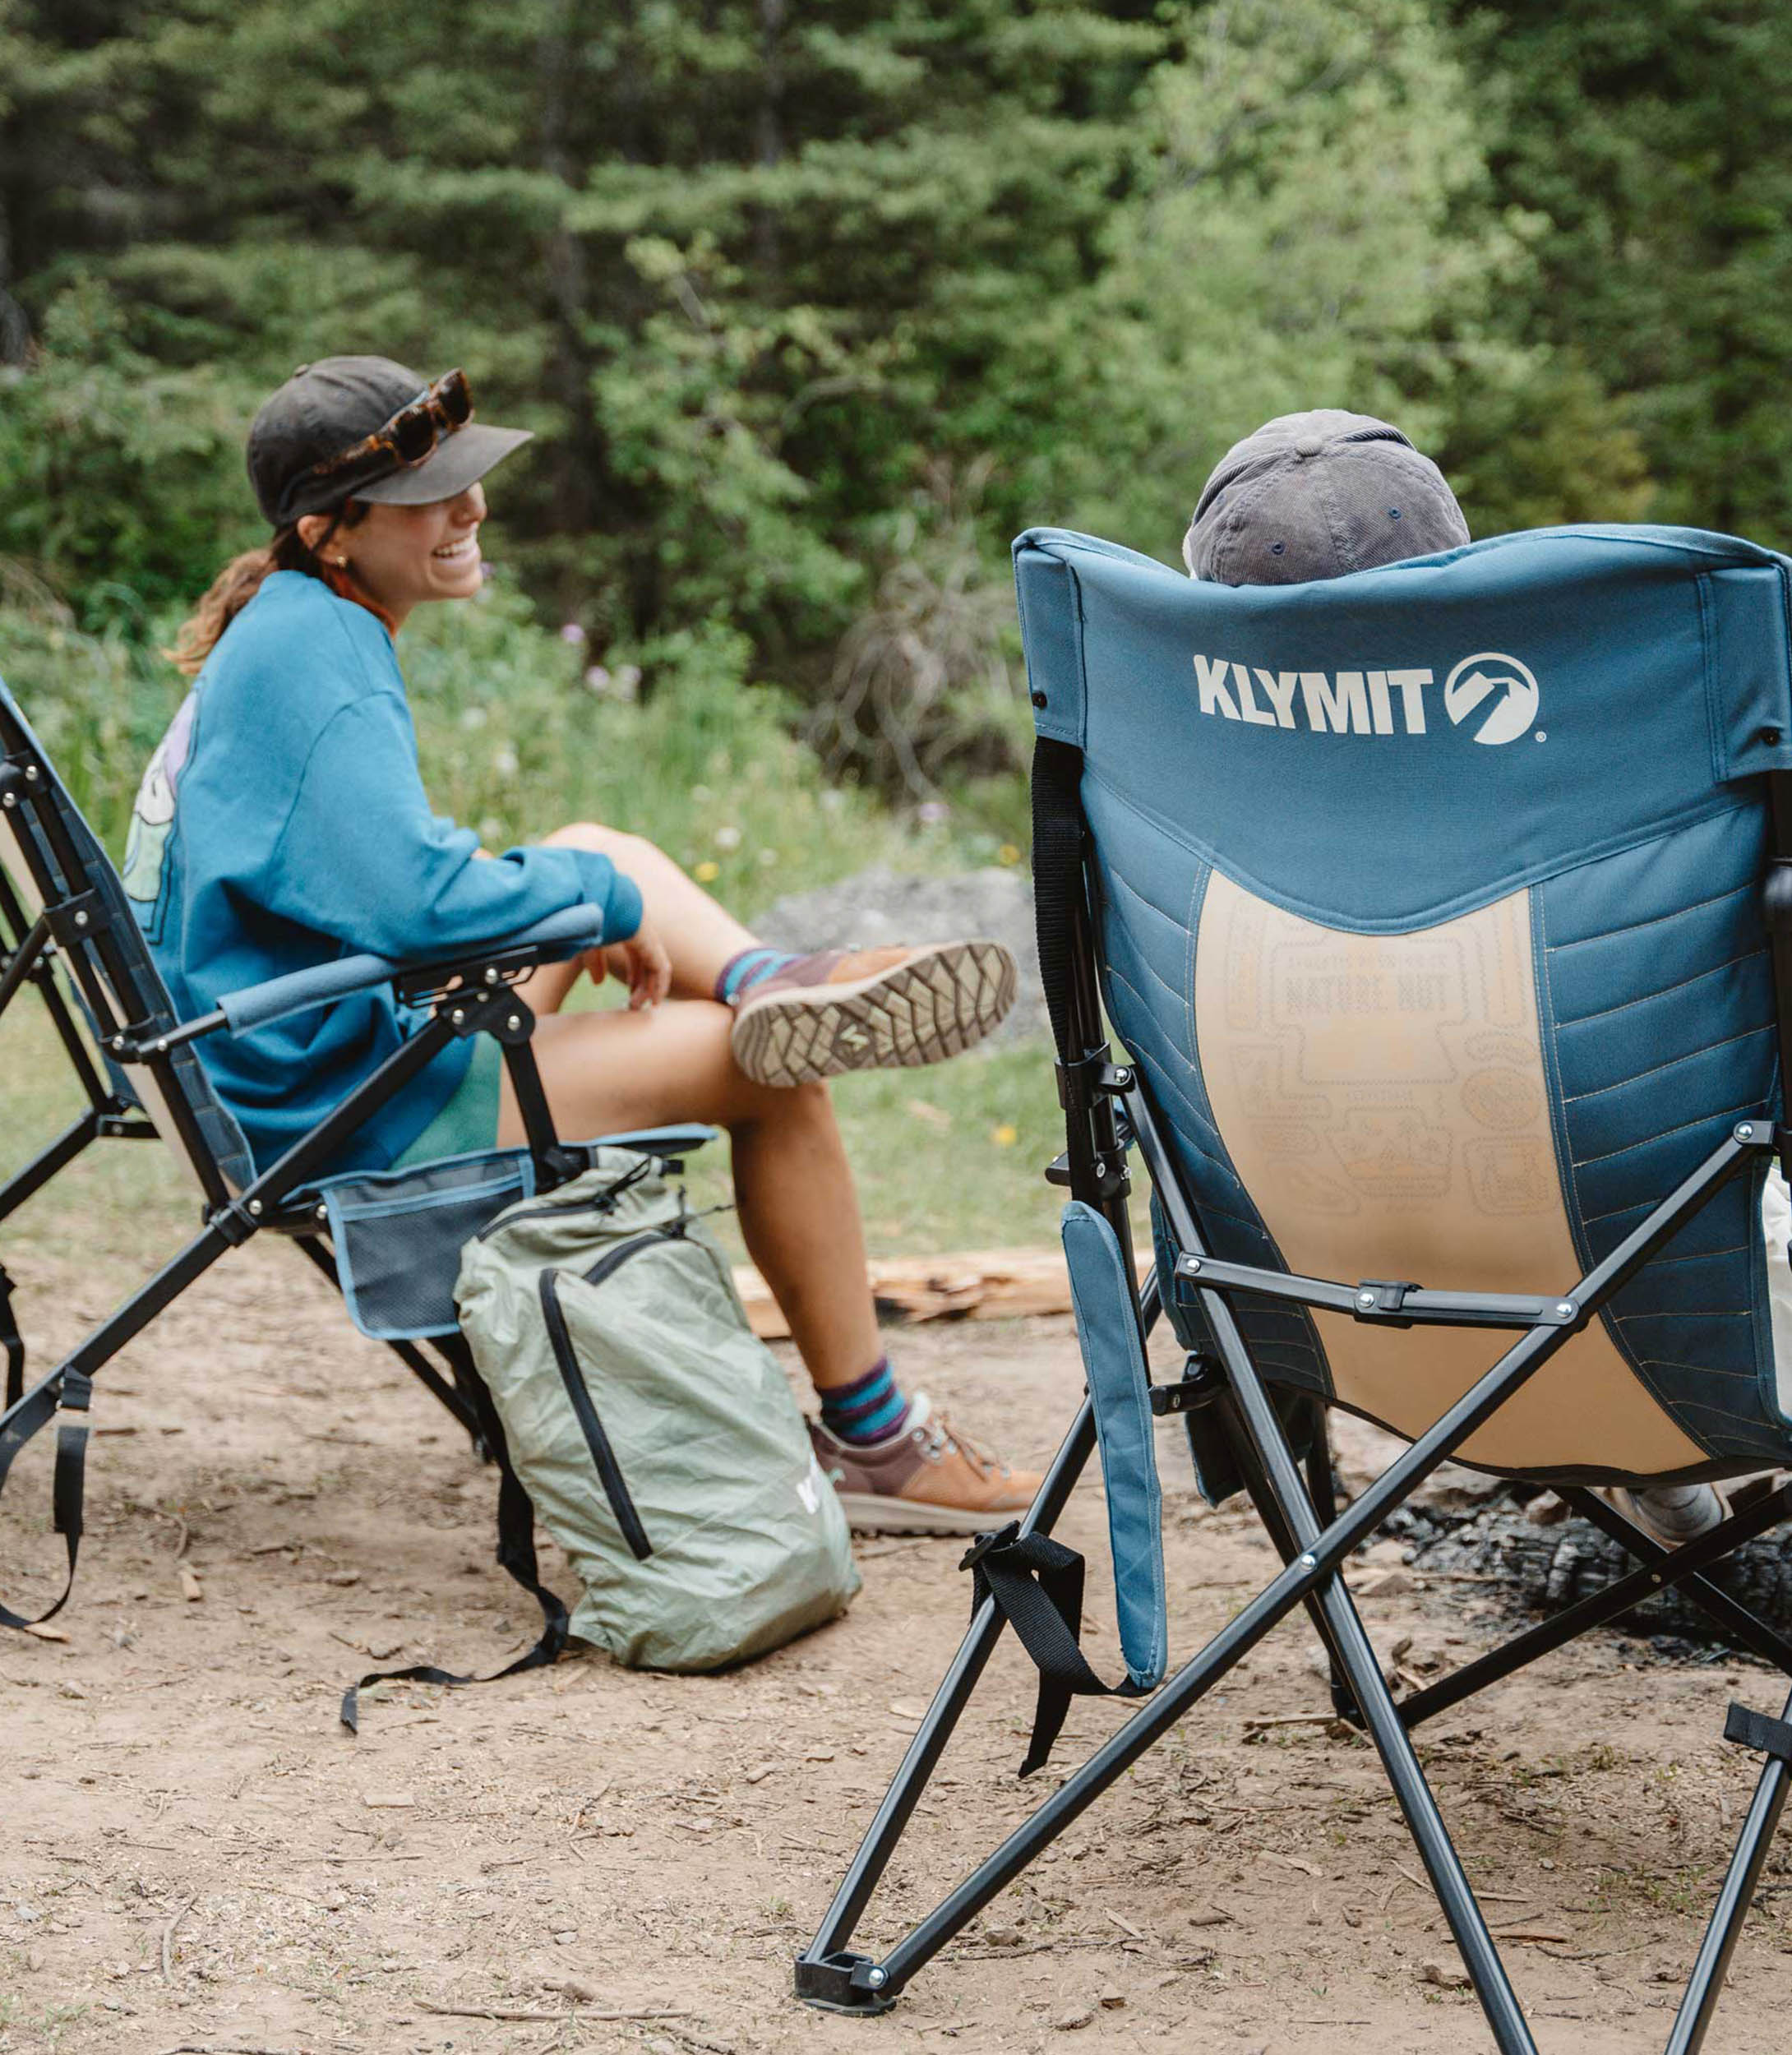 Chaise de camping inclinable Switchback